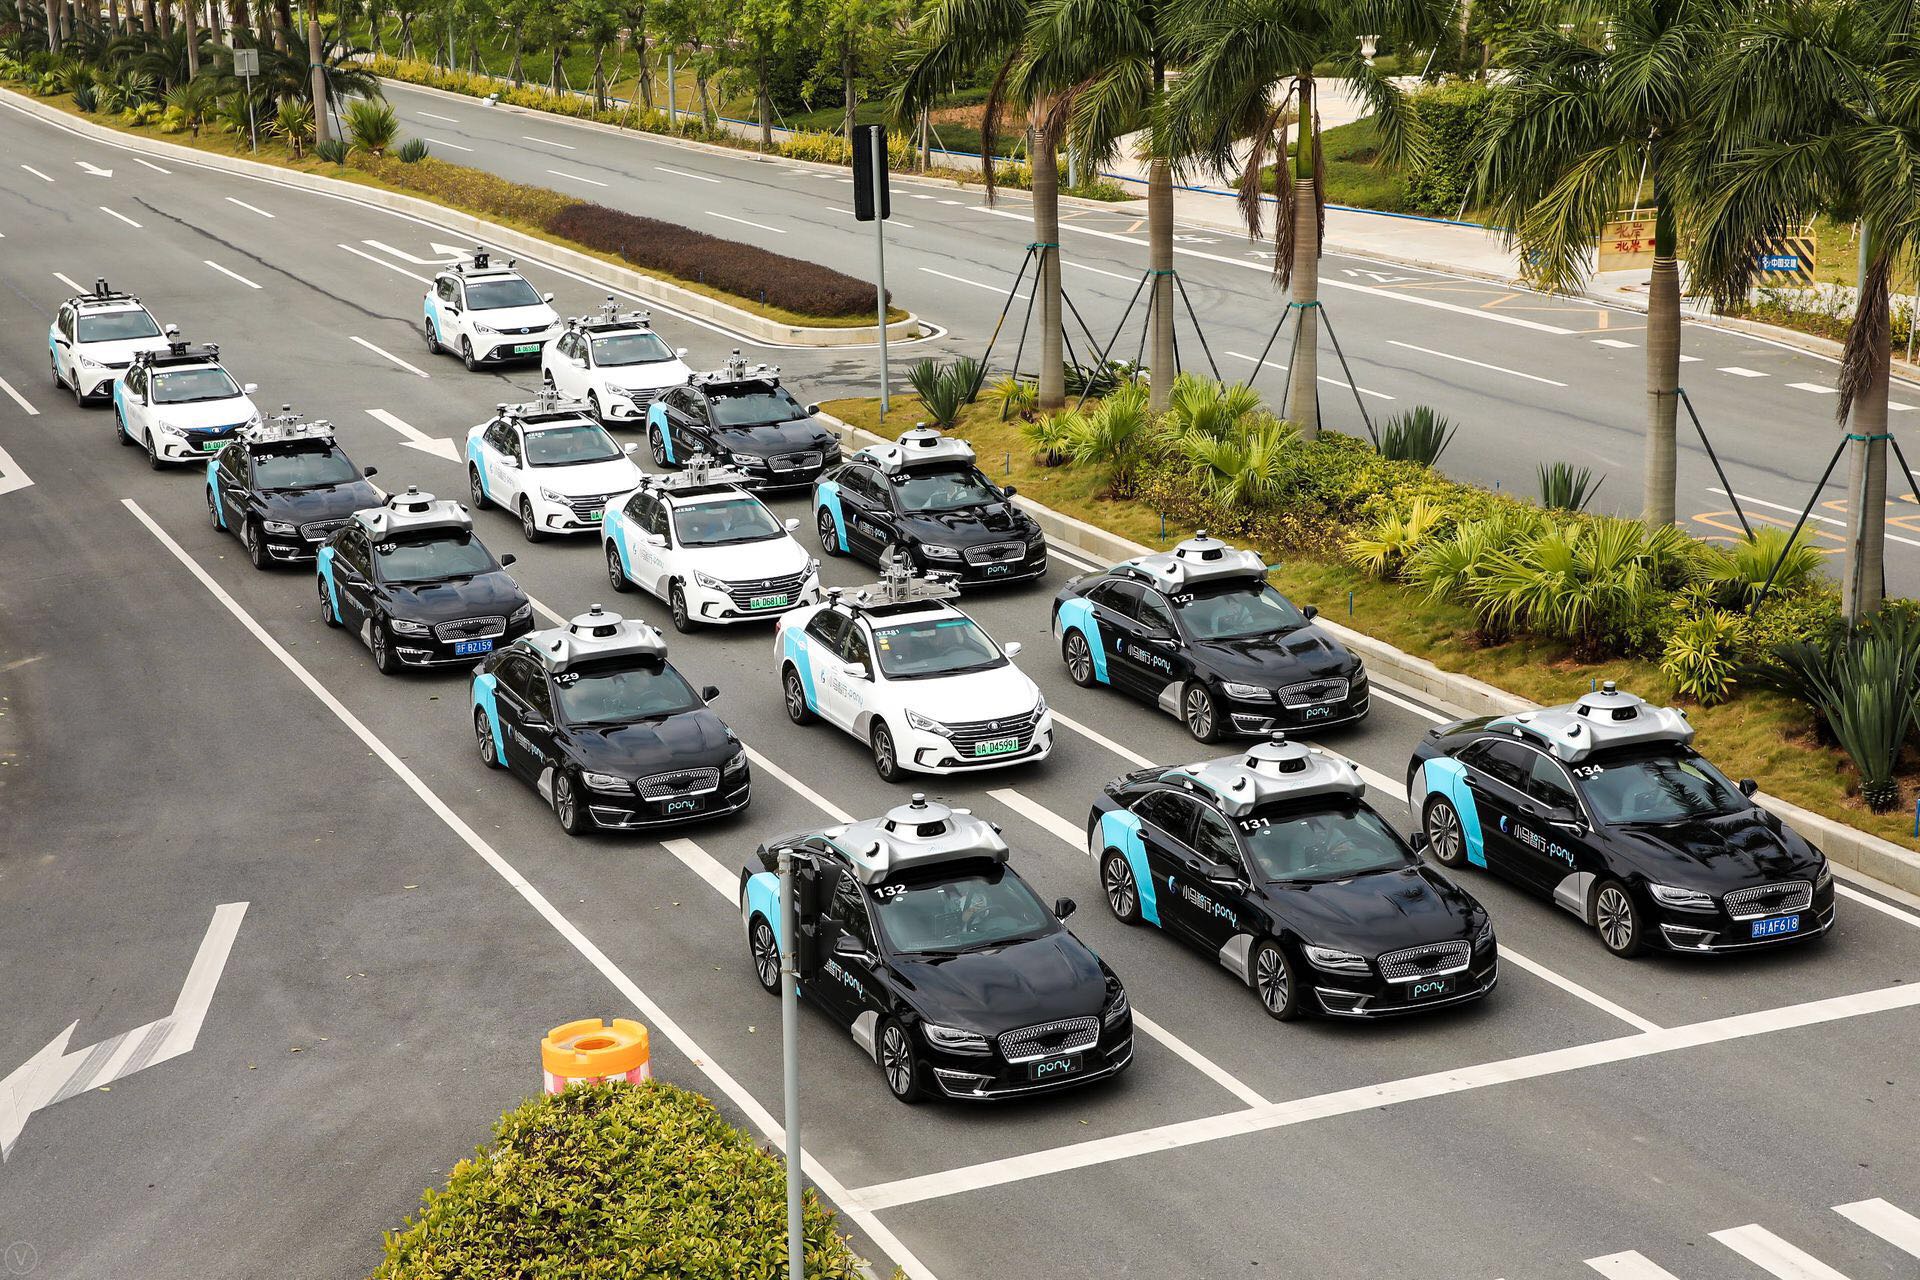 Nansha-based Pony.ai, is going to expand its trial to the general public, who can hail a ride through a booking app, with
plans to boost its robotaxi fleet to 80-100 from the current 30 by 2019.
